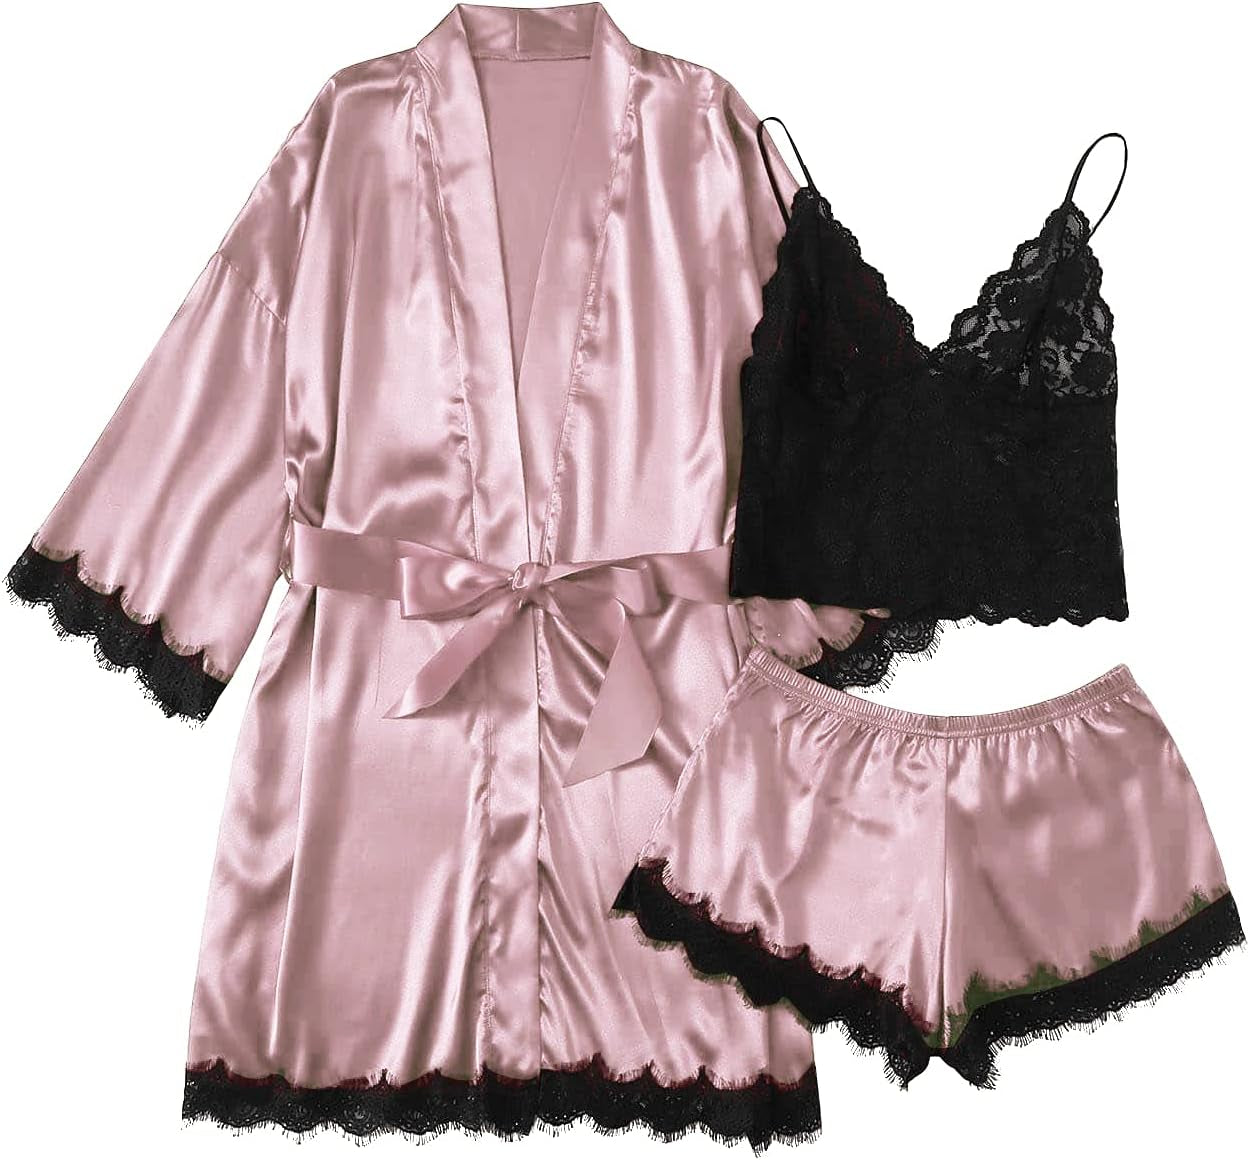 "Glamorous Satin Silk Lace Lingerie Set: Cami Top, Shorts, and Robe - Ideal Sleepwear for Women"